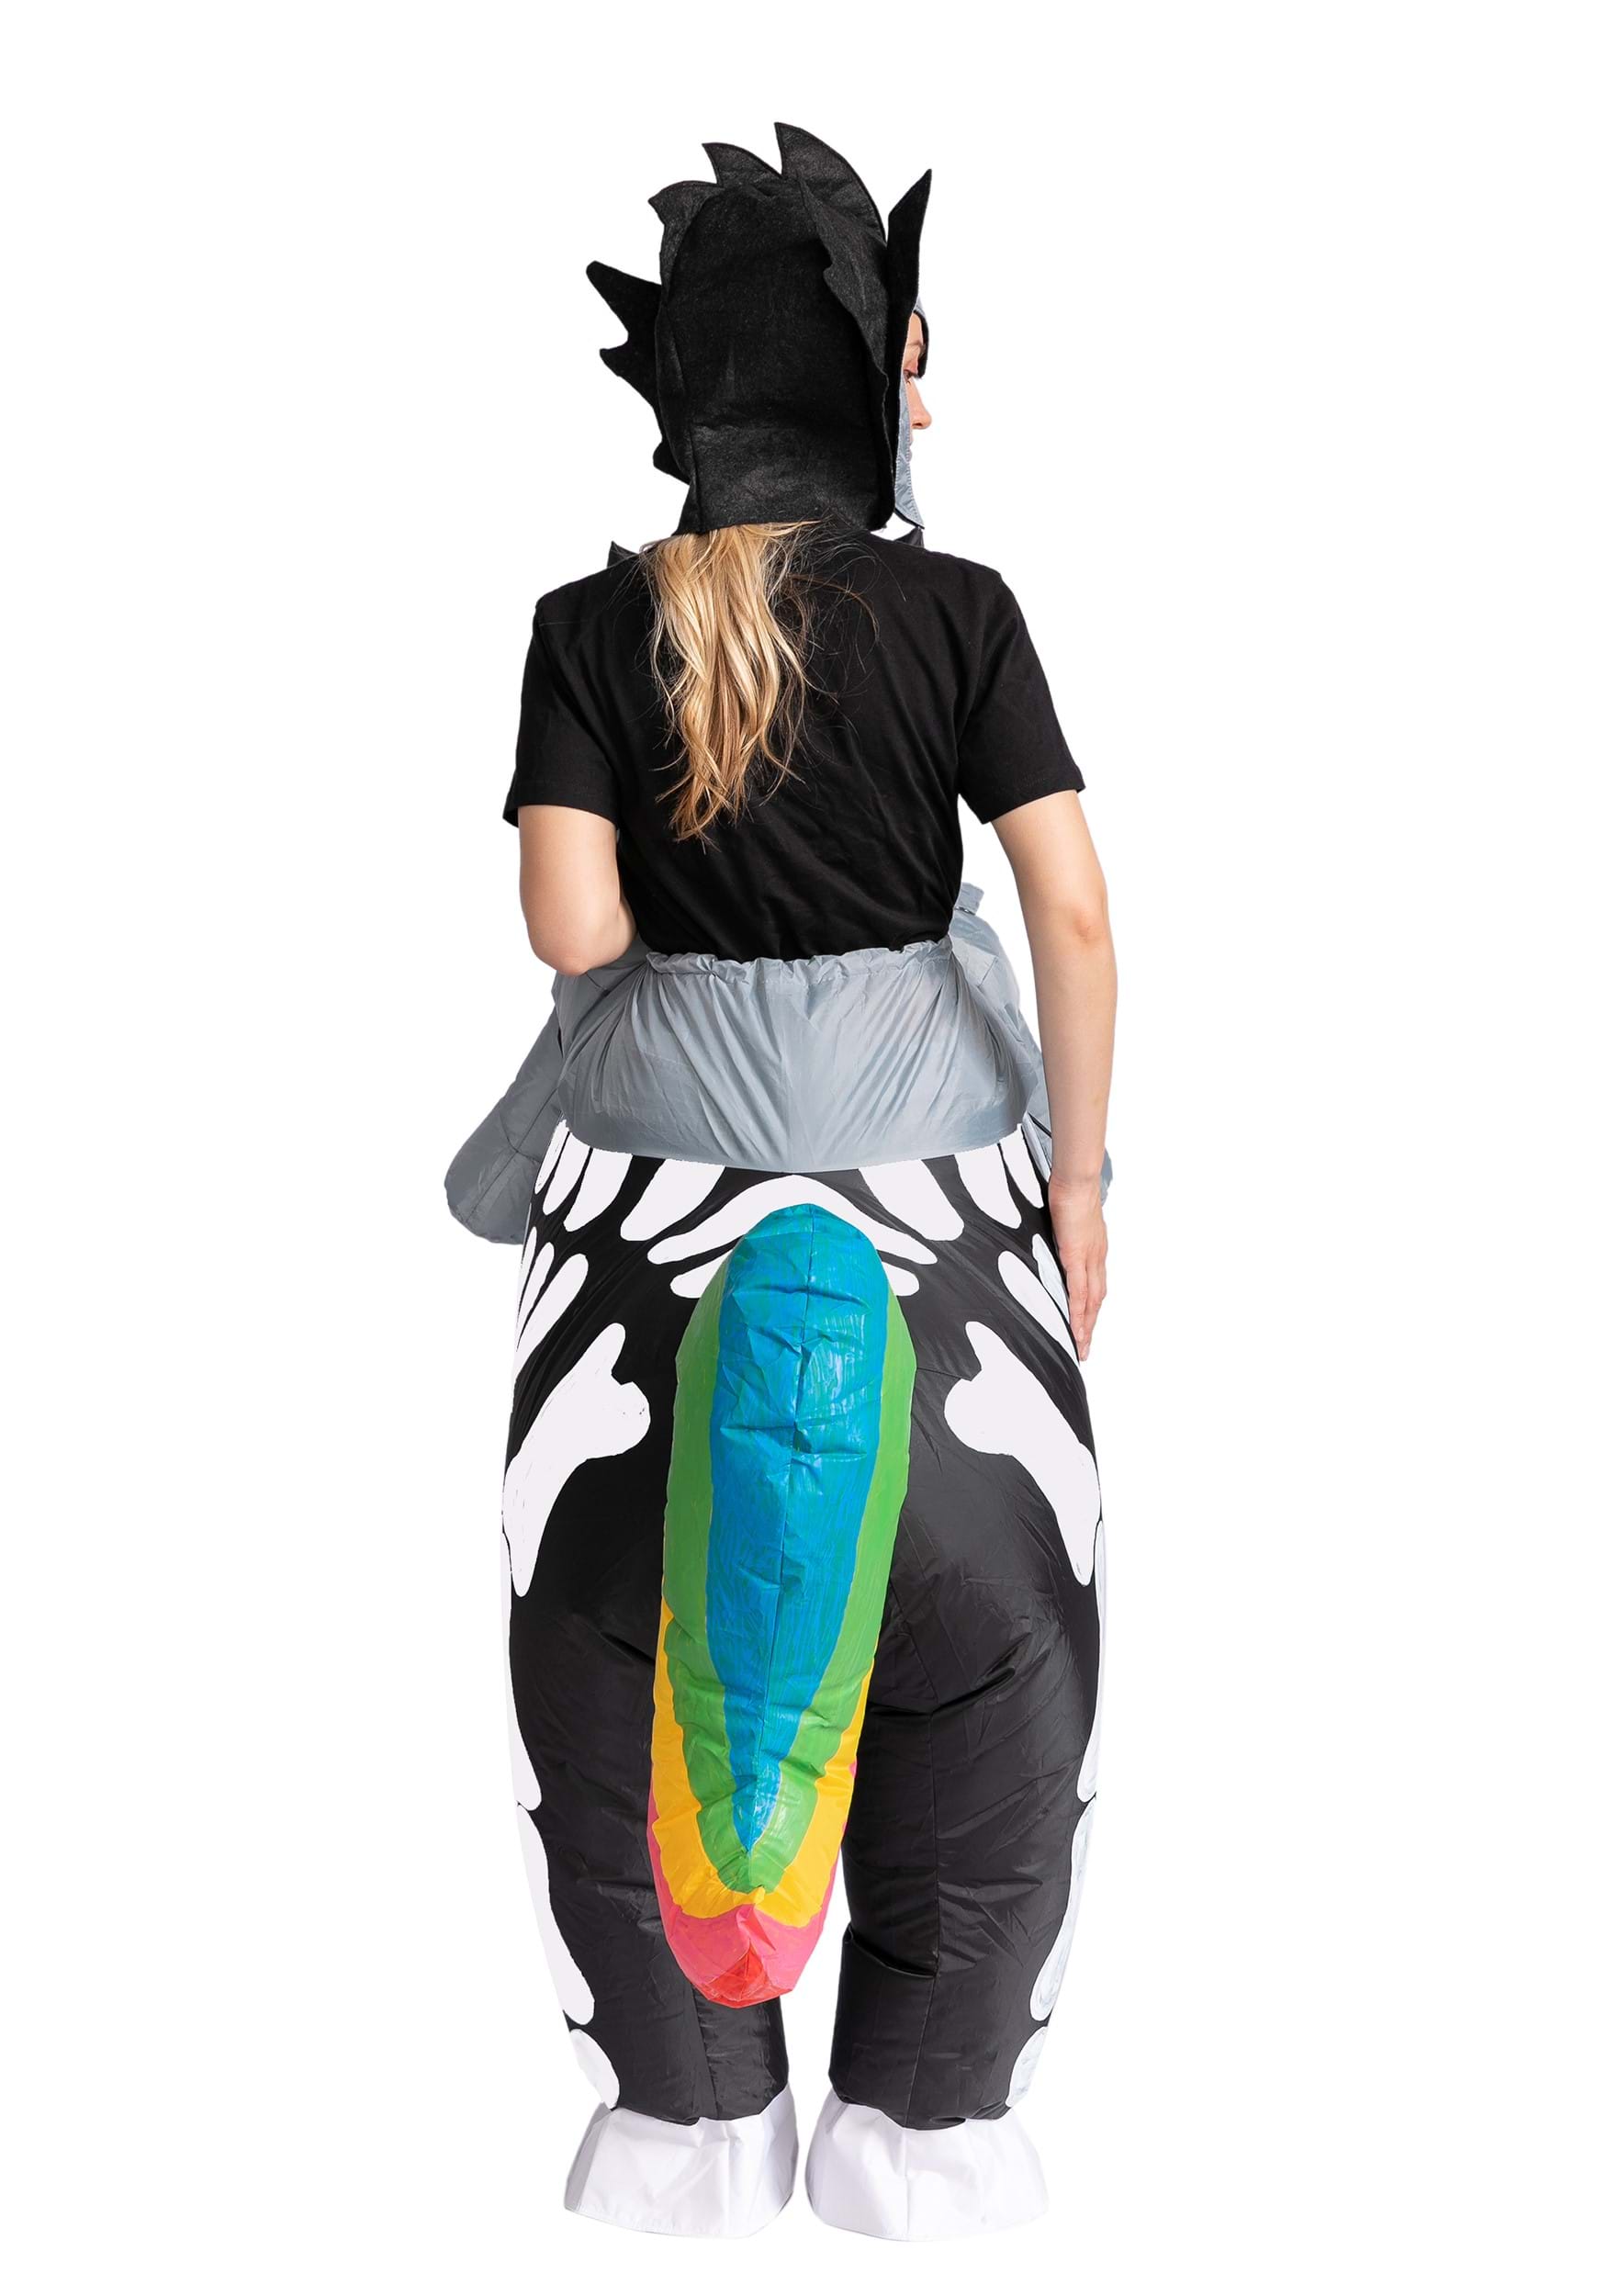 Inflatable Adult Riding-A-Skeleton Unicorn Fancy Dress Costume